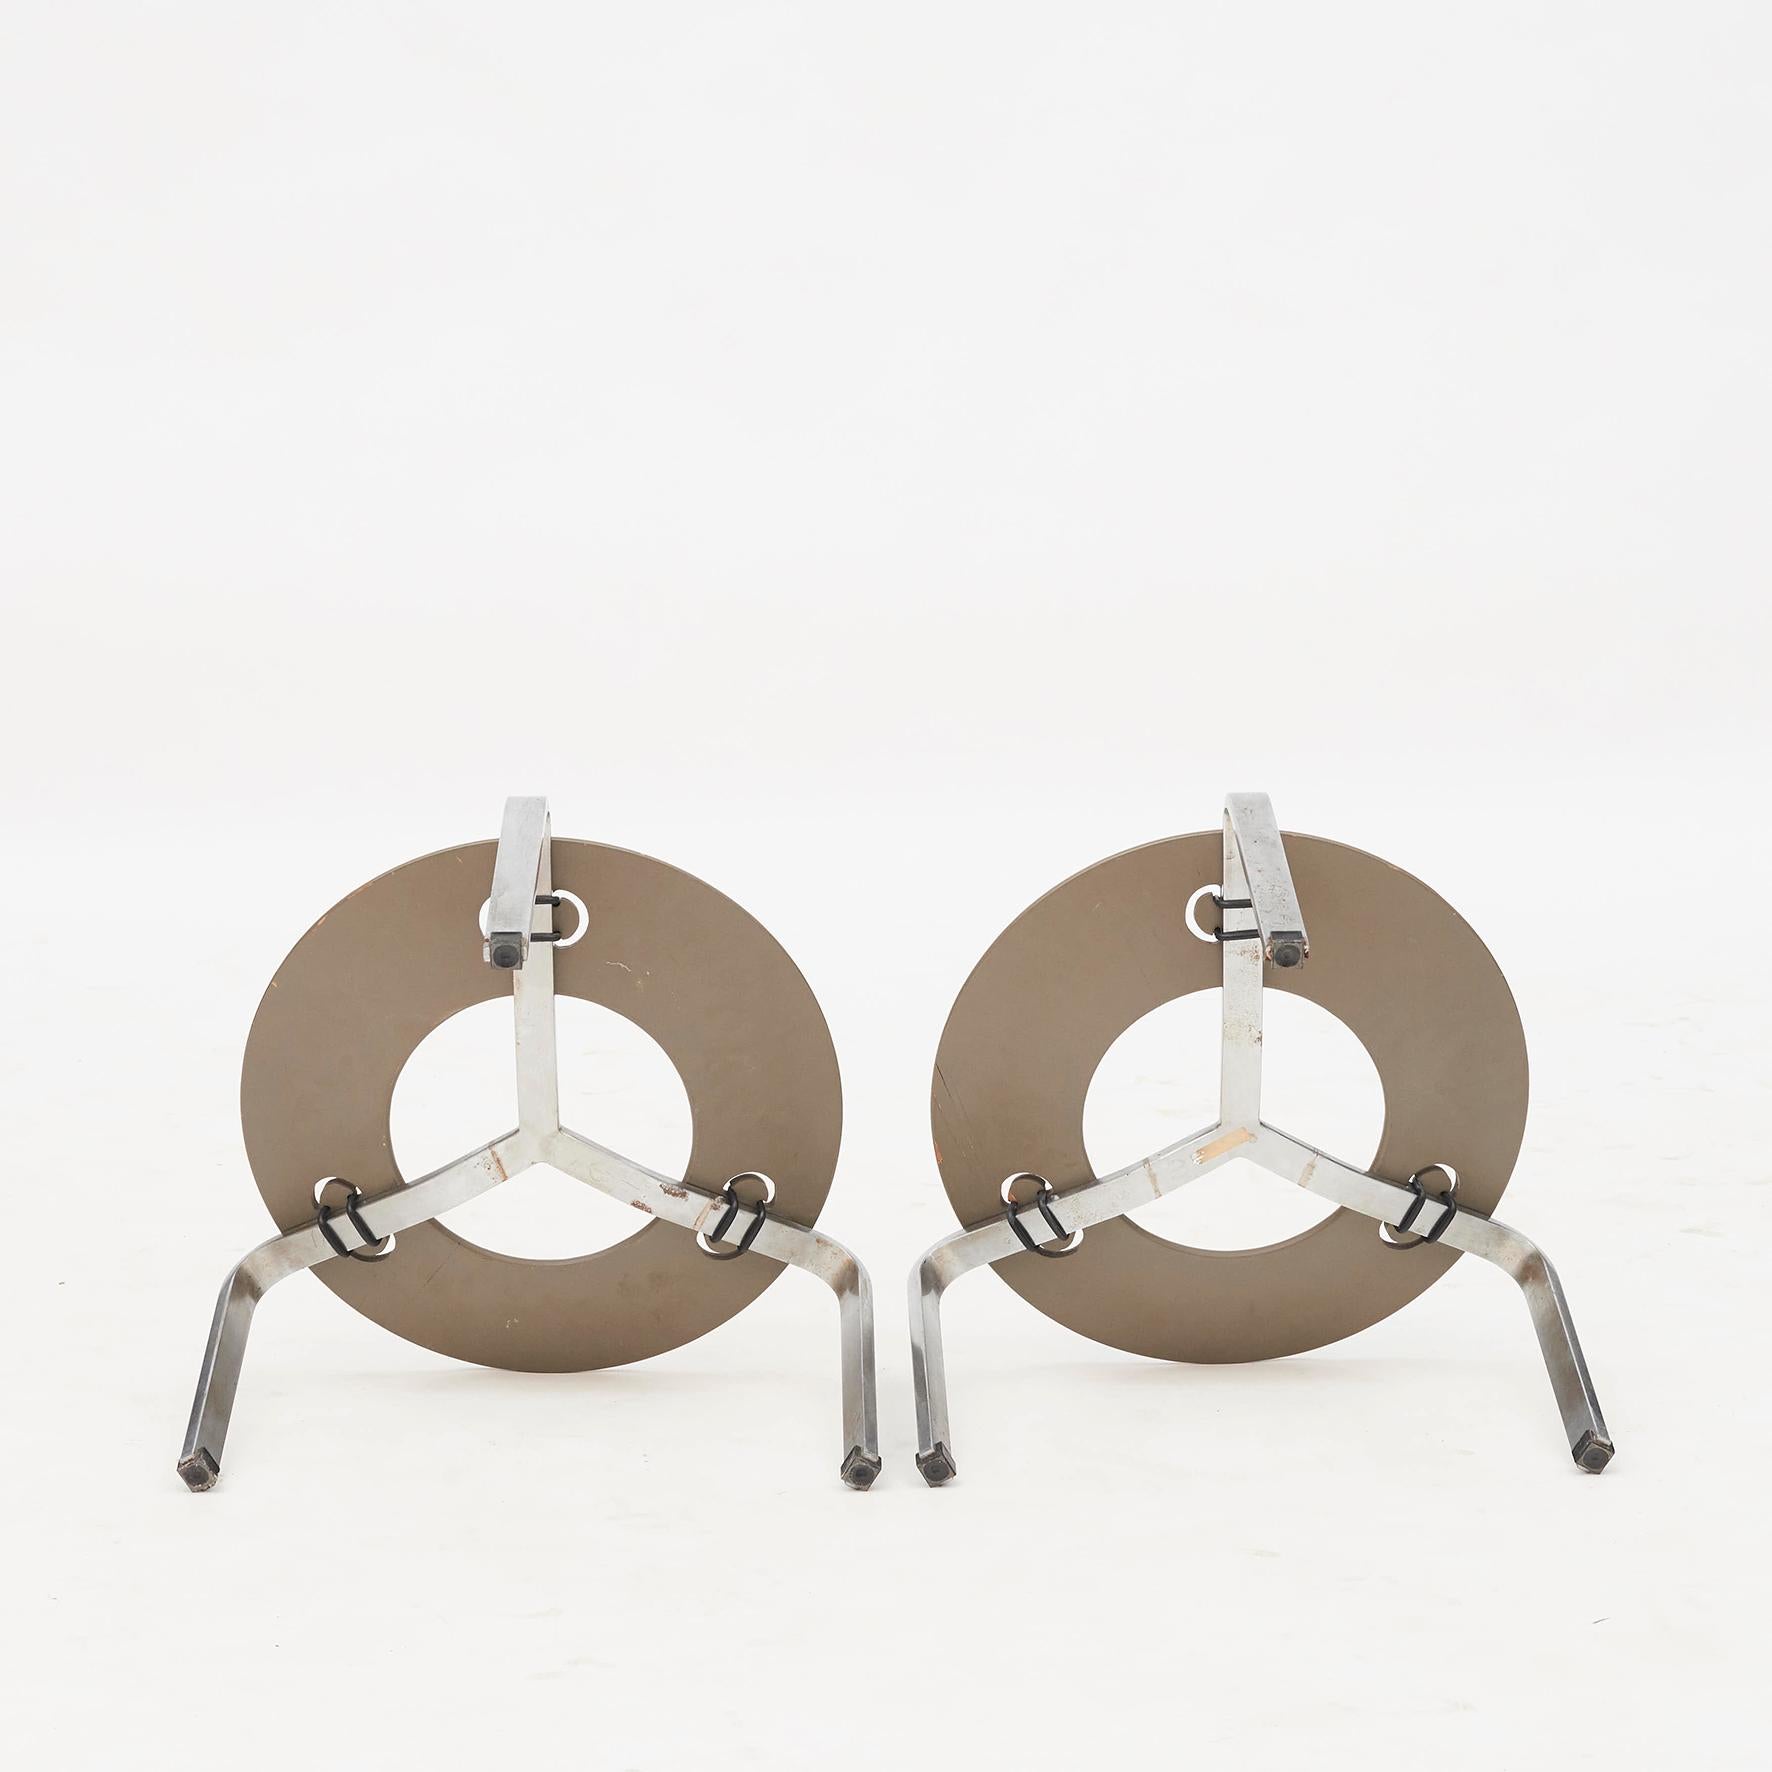 Pair of Poul Kjærholm (1929-1980) footstool model PK33. Matte chromed spring steel frame with a round cognac-colored patinated leather cushion. Maker's mark on underside.
Designed in 1959. Produced, stamped, and labelled by Fritz Hansen,